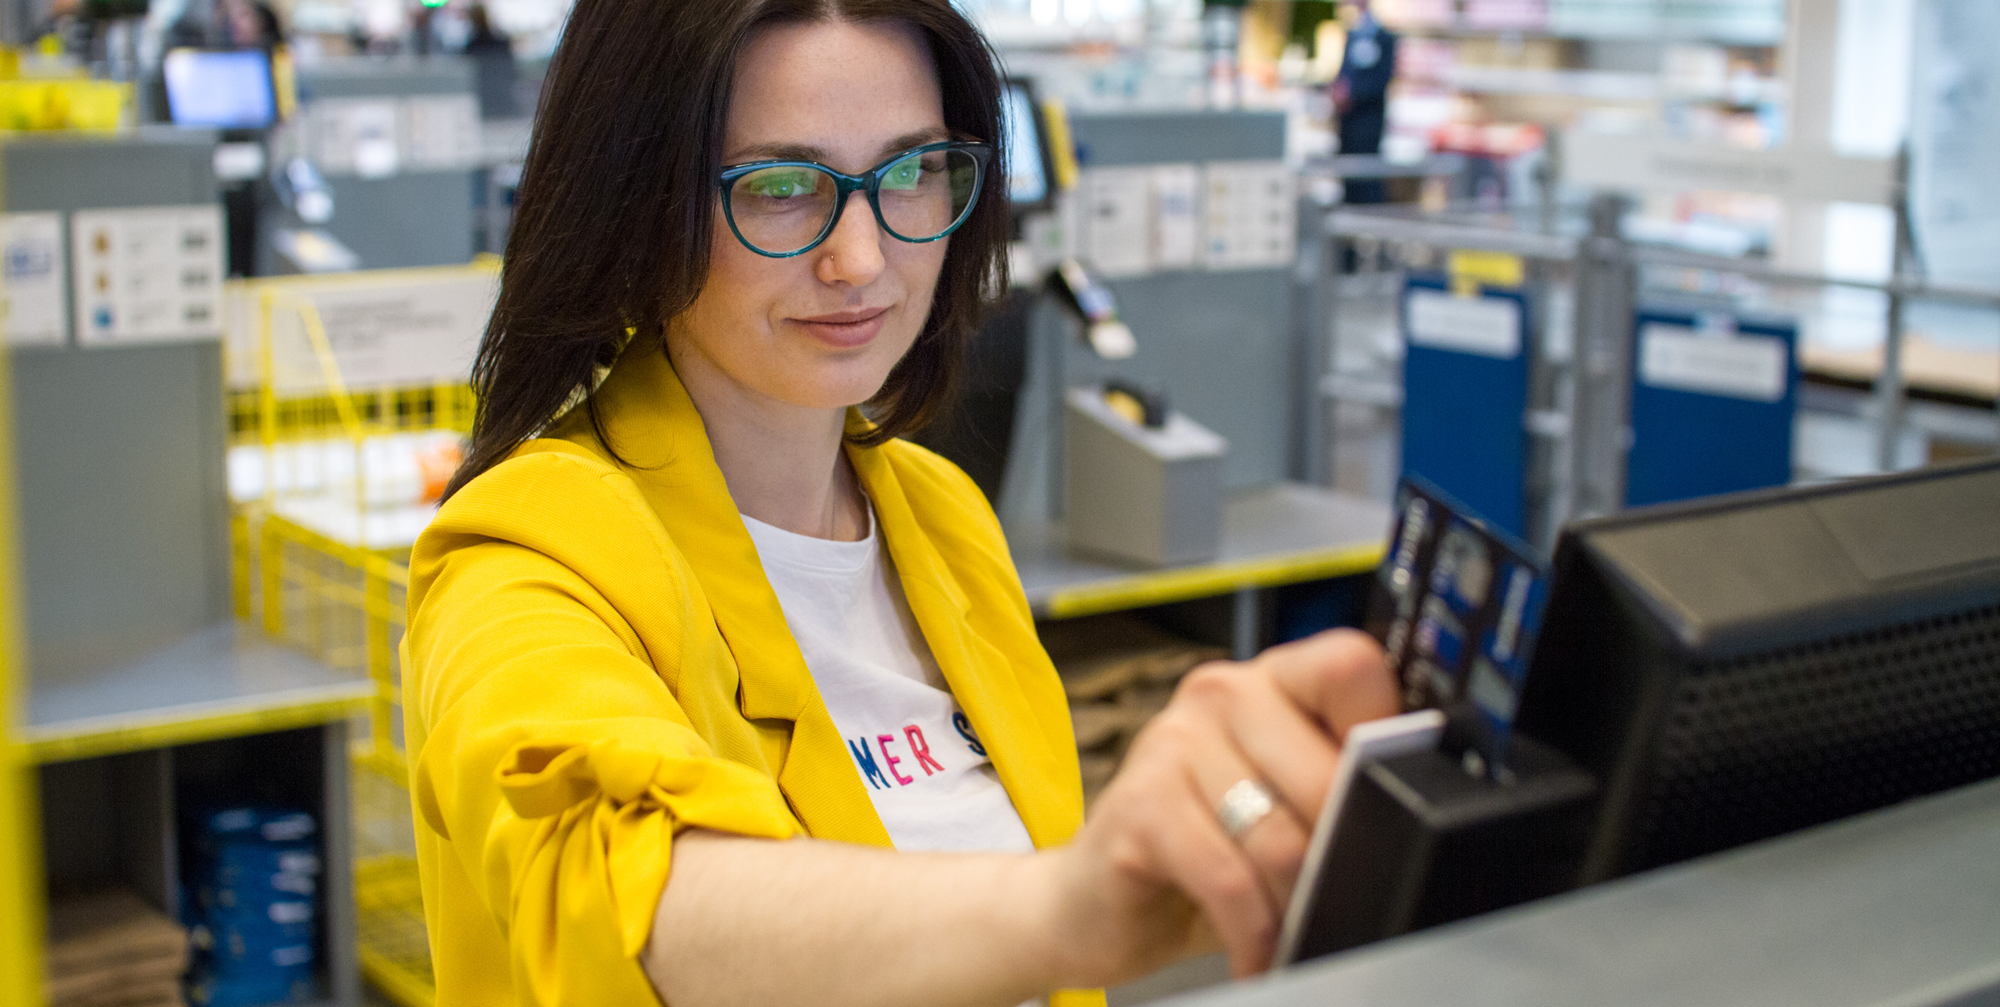 Discover the Benefits of Retail Self-Checkout